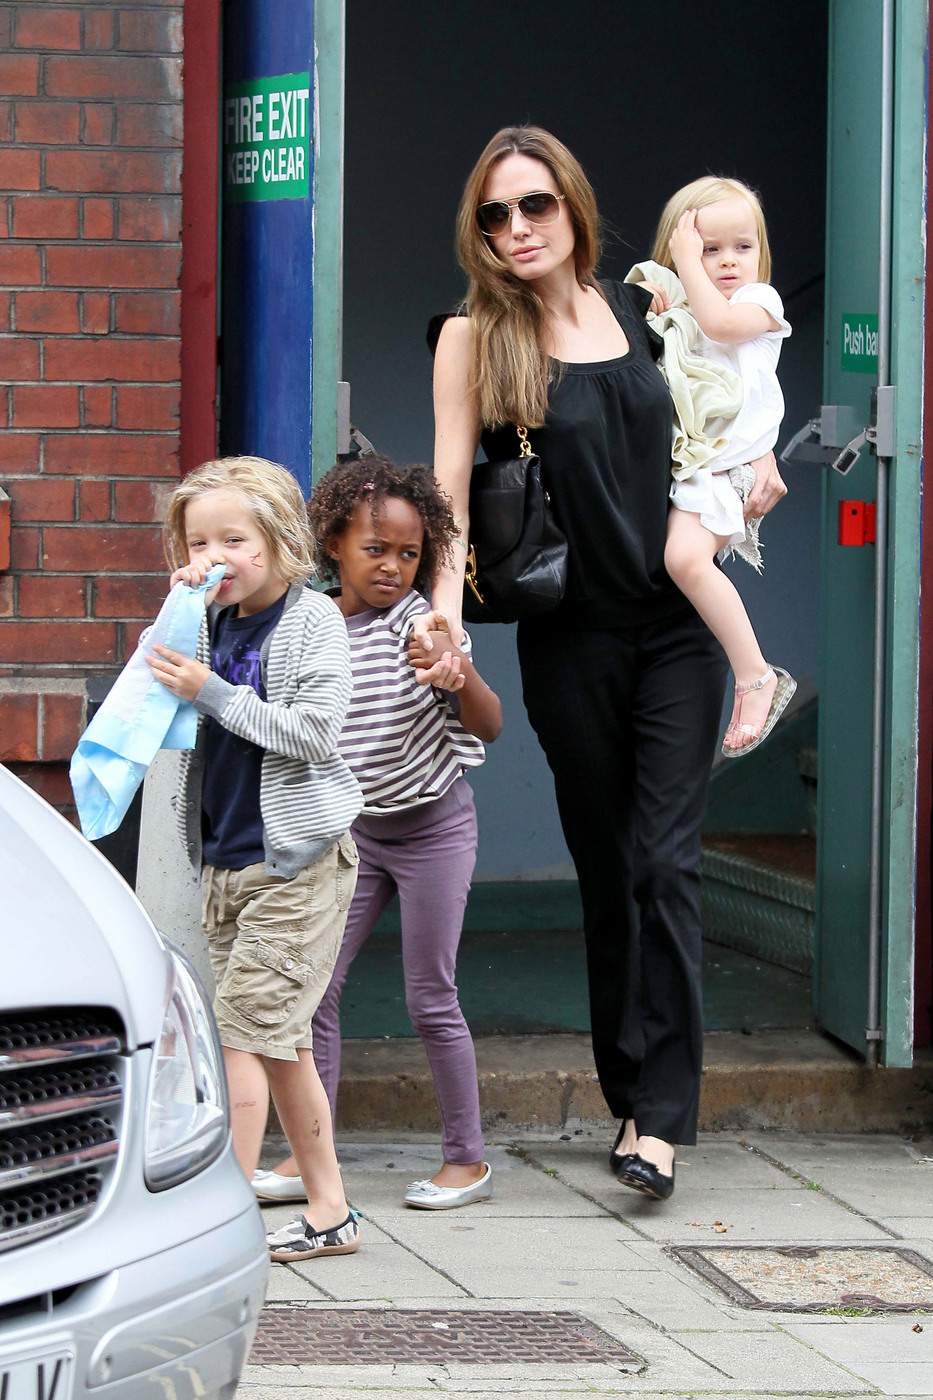 66234, LONDON, UNITED KINGDOM - Sunday September 4, 2011. Angelina Jolie and Brad Pitt take their brood to the cinema to see "The Smurfs" in Richmond, London. The happy family included kids Pax, Zahara, Shiloh, and twins Knox and Vivienne. **NORTH AMERICAN USE ONLY** Photograph: © Optic Photos, PacificCoastNews.com **FEE MUST BE AGREED PRIOR TO USAGE** **E-TABLET/IPAD & MOBILE PHONE APP PUBLISHING REQUIRES ADDITIONAL FEES** UK OFFICE:+44 131 557 7760/7761 US OFFICE:1 310 261 9676